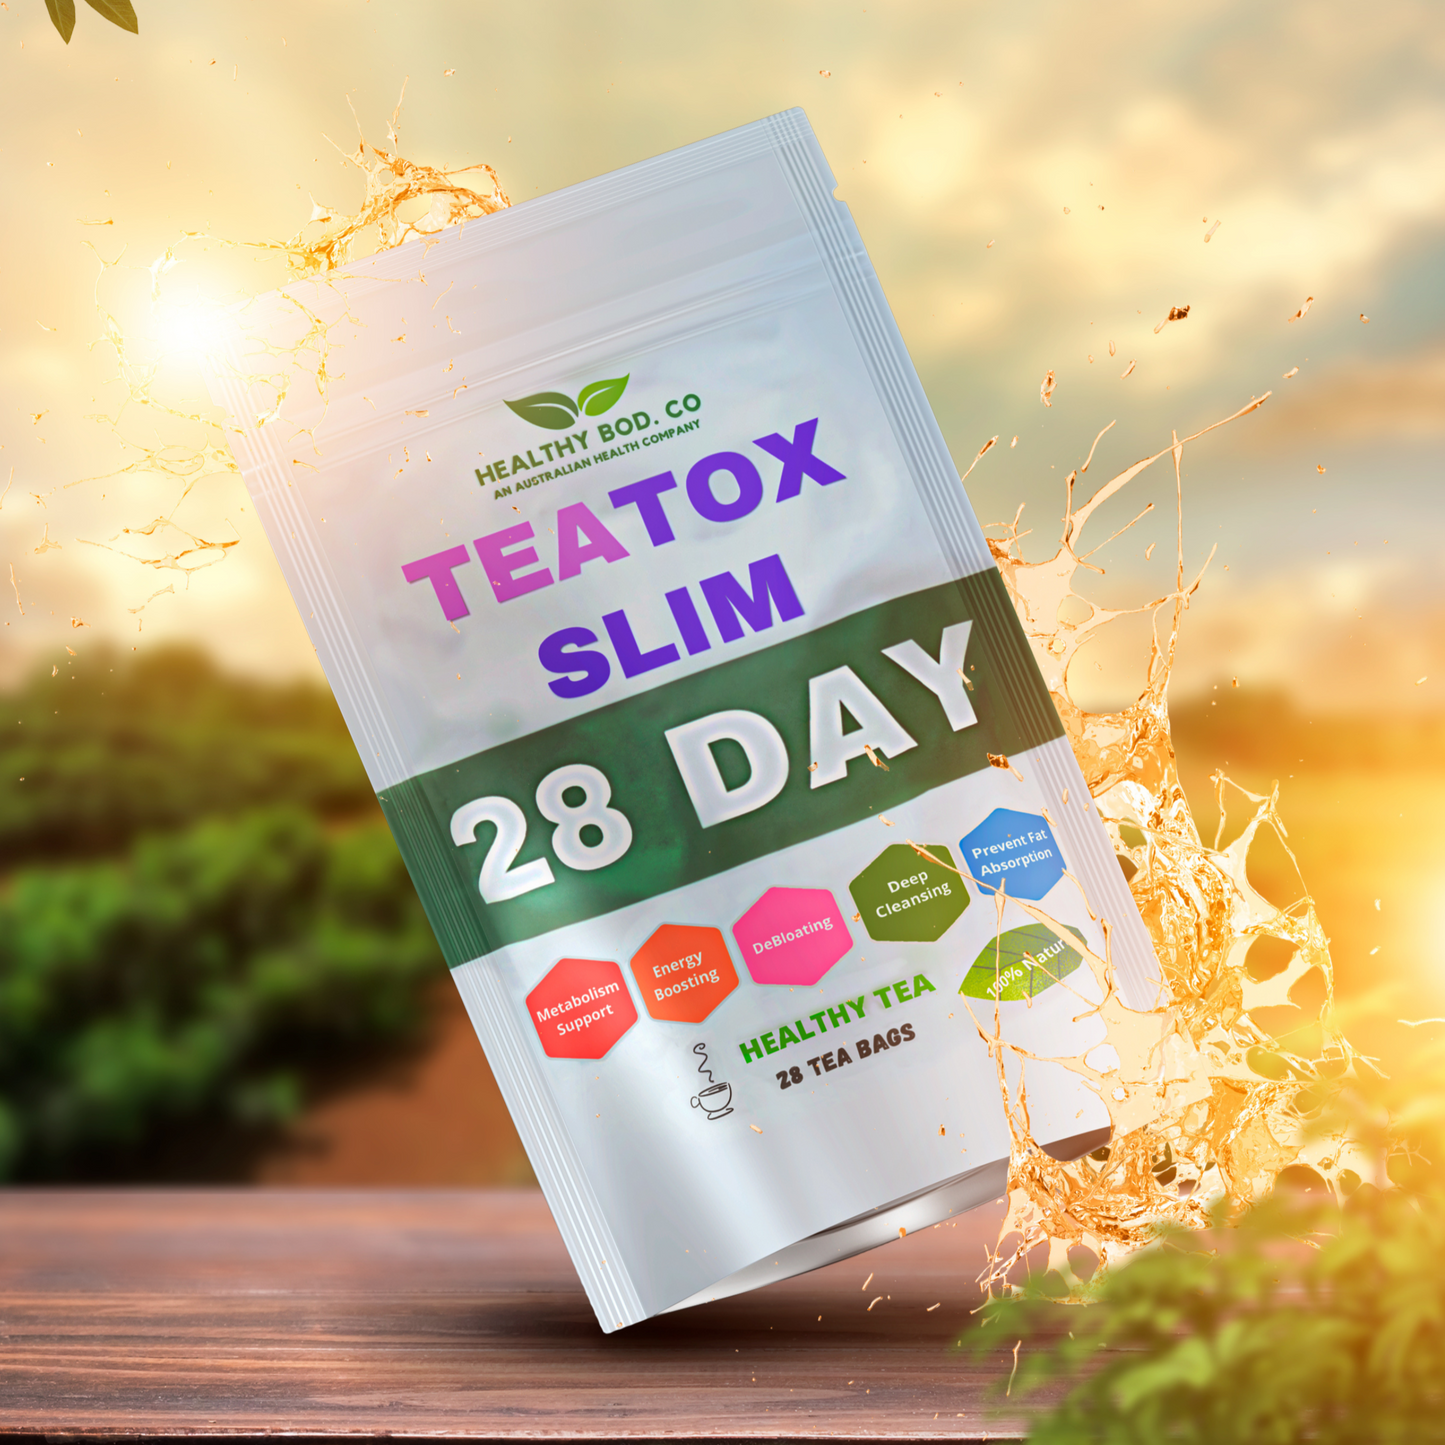 Complete Detox Kit: Teatox Herbal Cleanse + Foot Patches